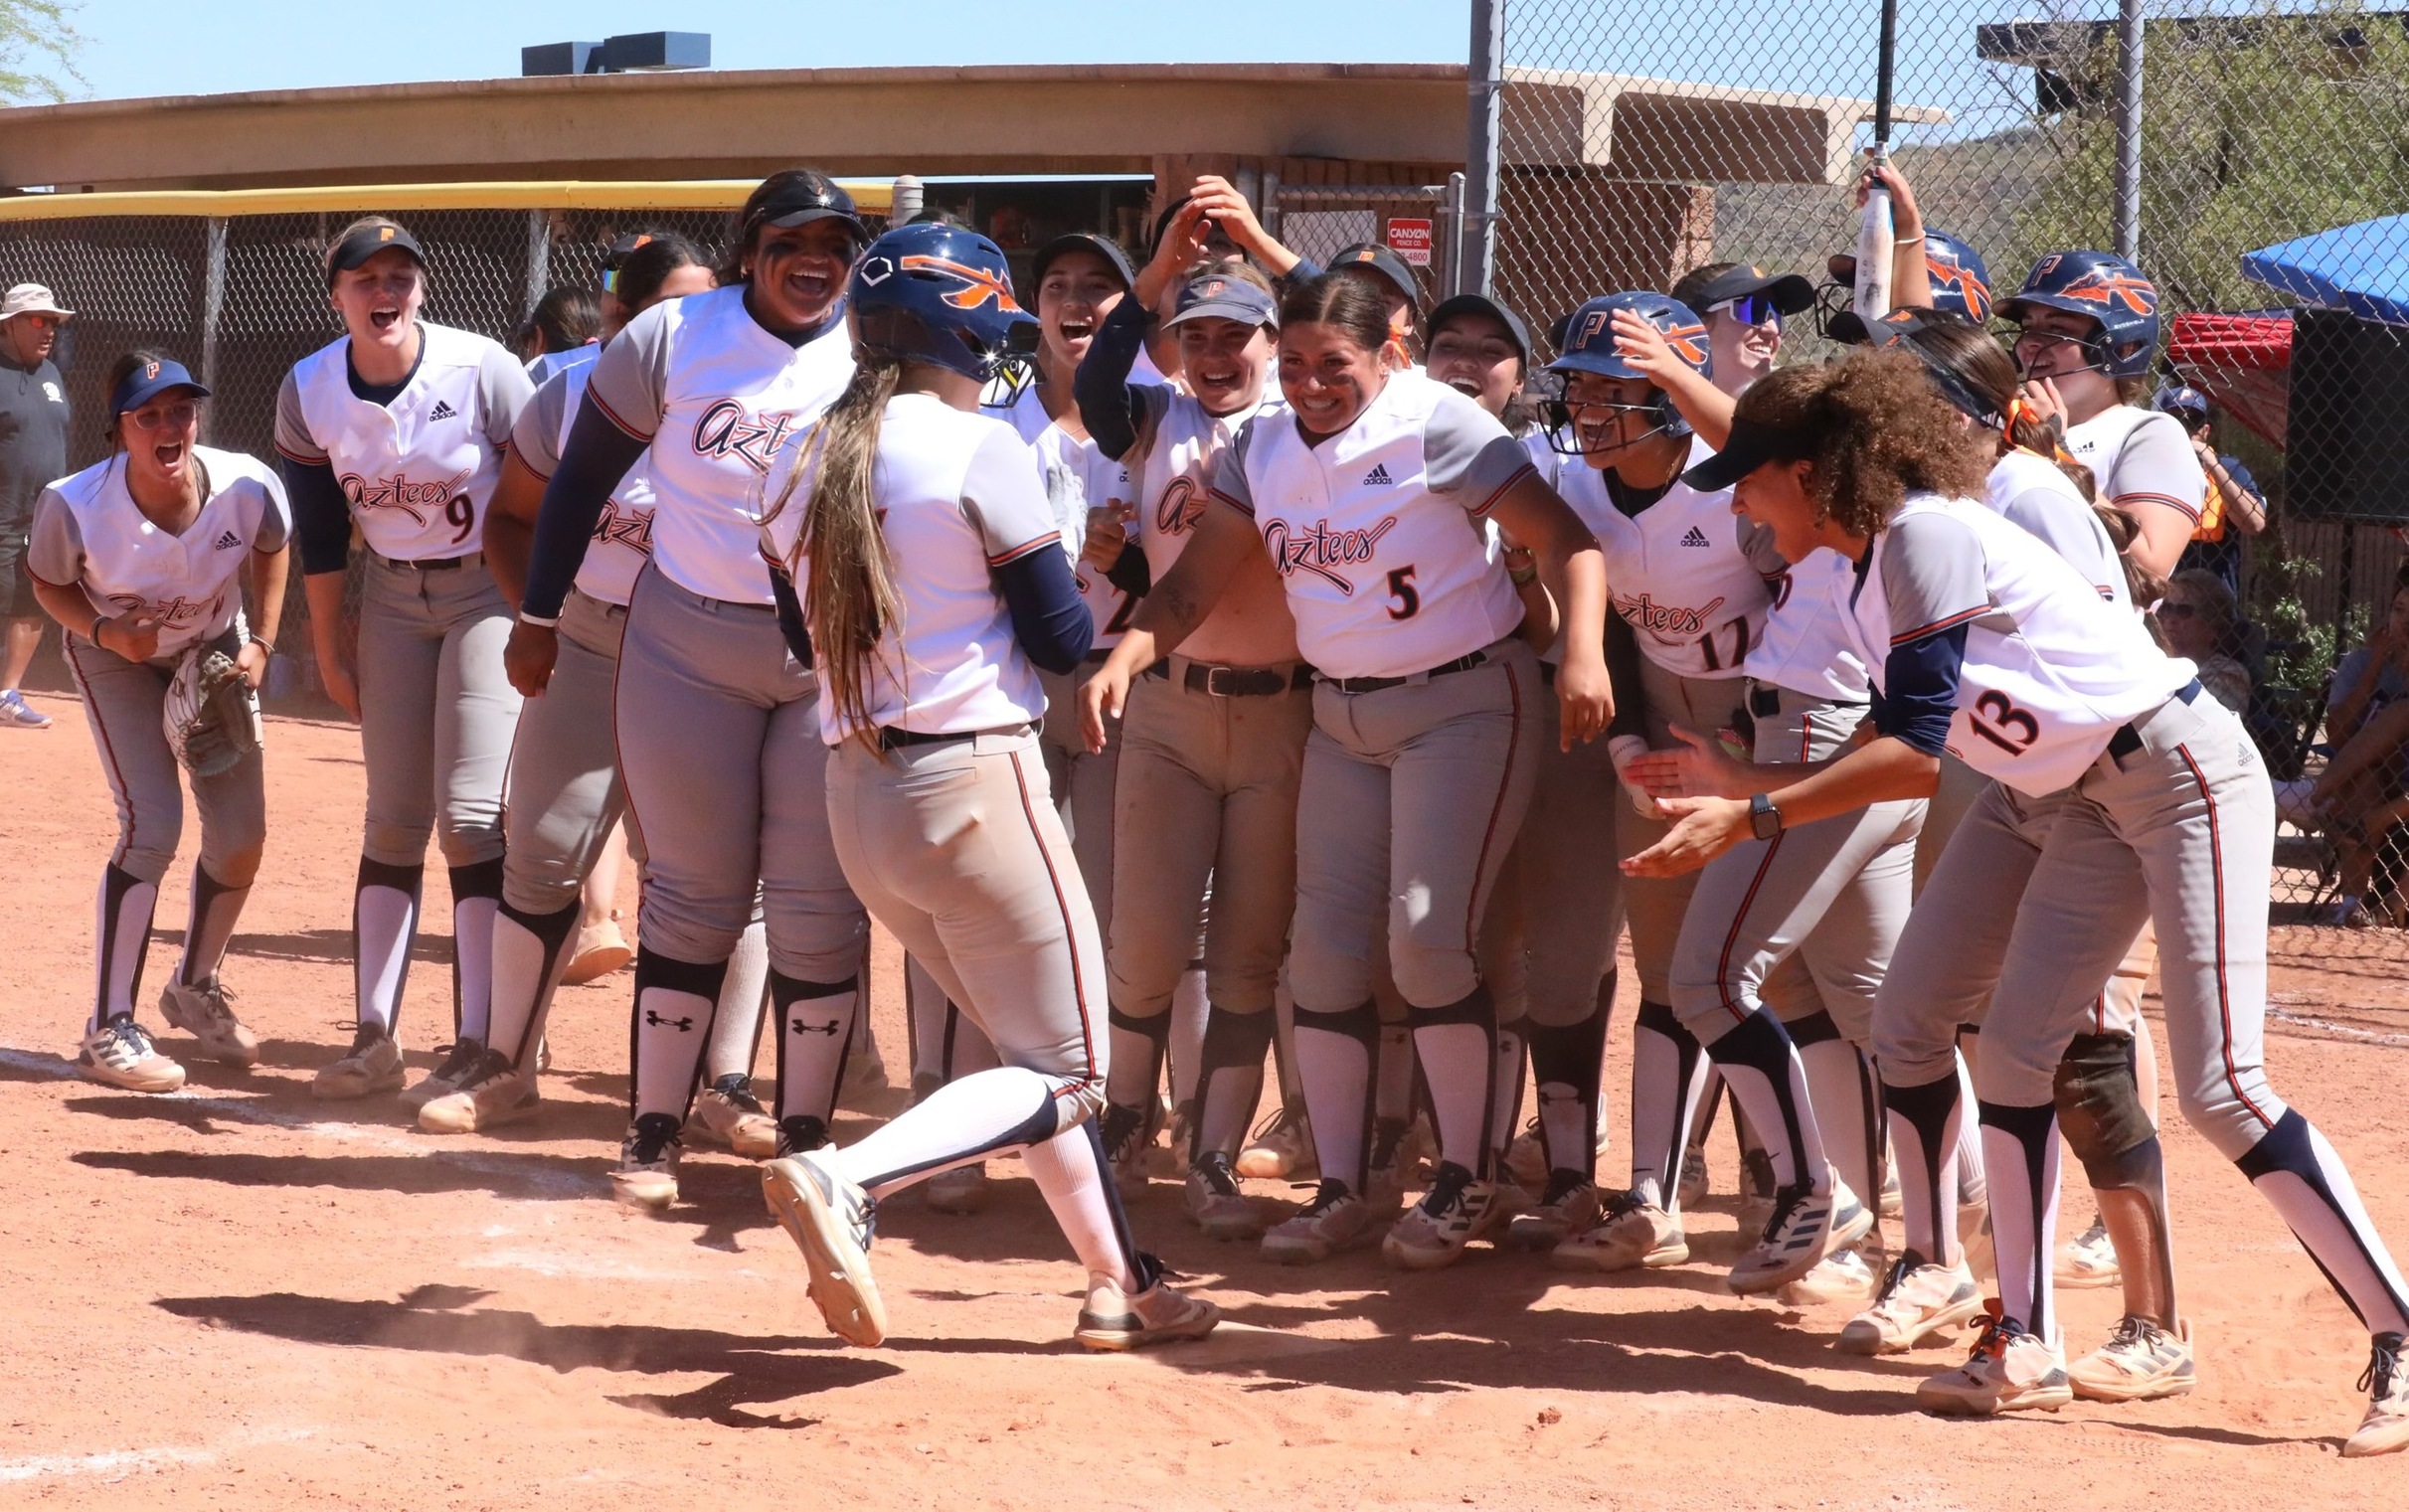 The Aztecs greet freshman Yanelyssia Chavez (Salpointe Catholic HS) as she crosses home plate after hitting the game-tying three-run home run in the 6th inning. Freshman Jazmyne Waddell (#5) hit a sacrifice-fly walk-off in the 7th as the Aztecs Softball team won their 26th straight game after sweeping Central Arizona College 13-12 and 10-5. The Aztecs are now 35-8 overall and 22-2 in ACCAC conference play. Photo by Steve Escobar